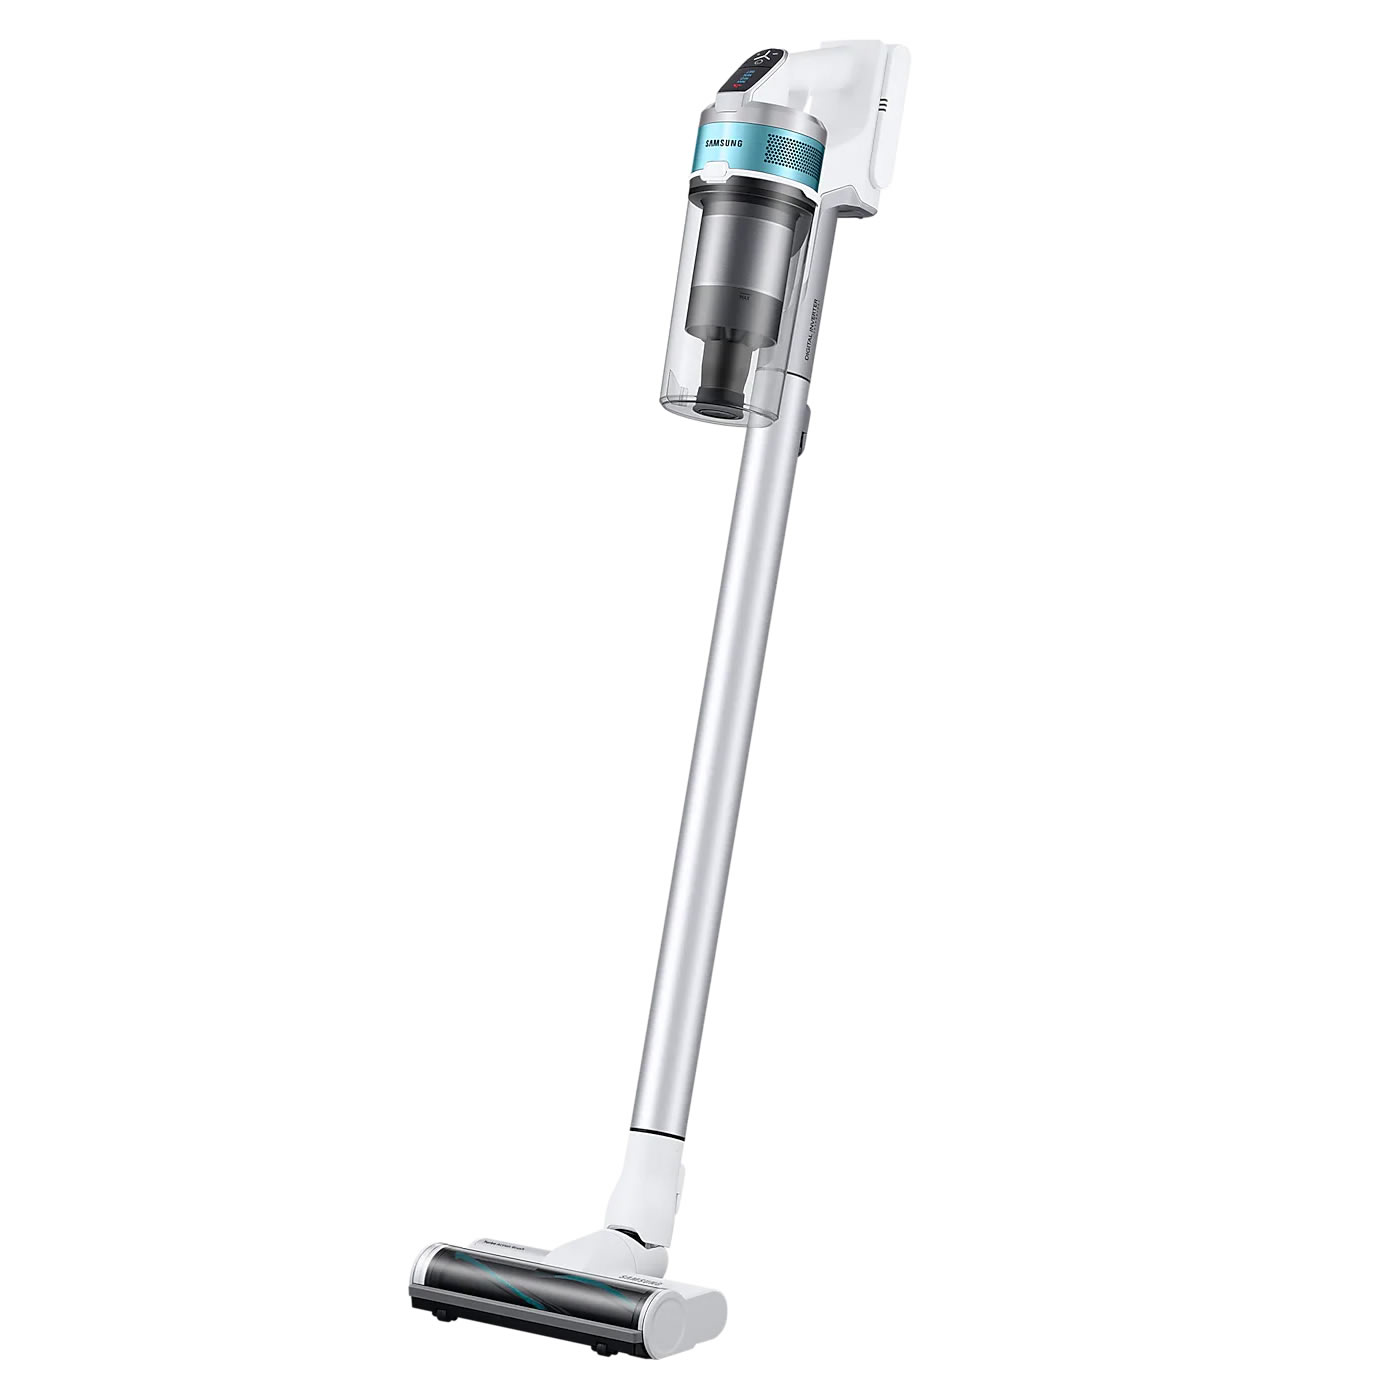 Image of Samsung Jet 70 Pet VS15T7032R1 Cordless Stick Vacuum Cleaner Max 150W Suction Power with 40 Min Run Time